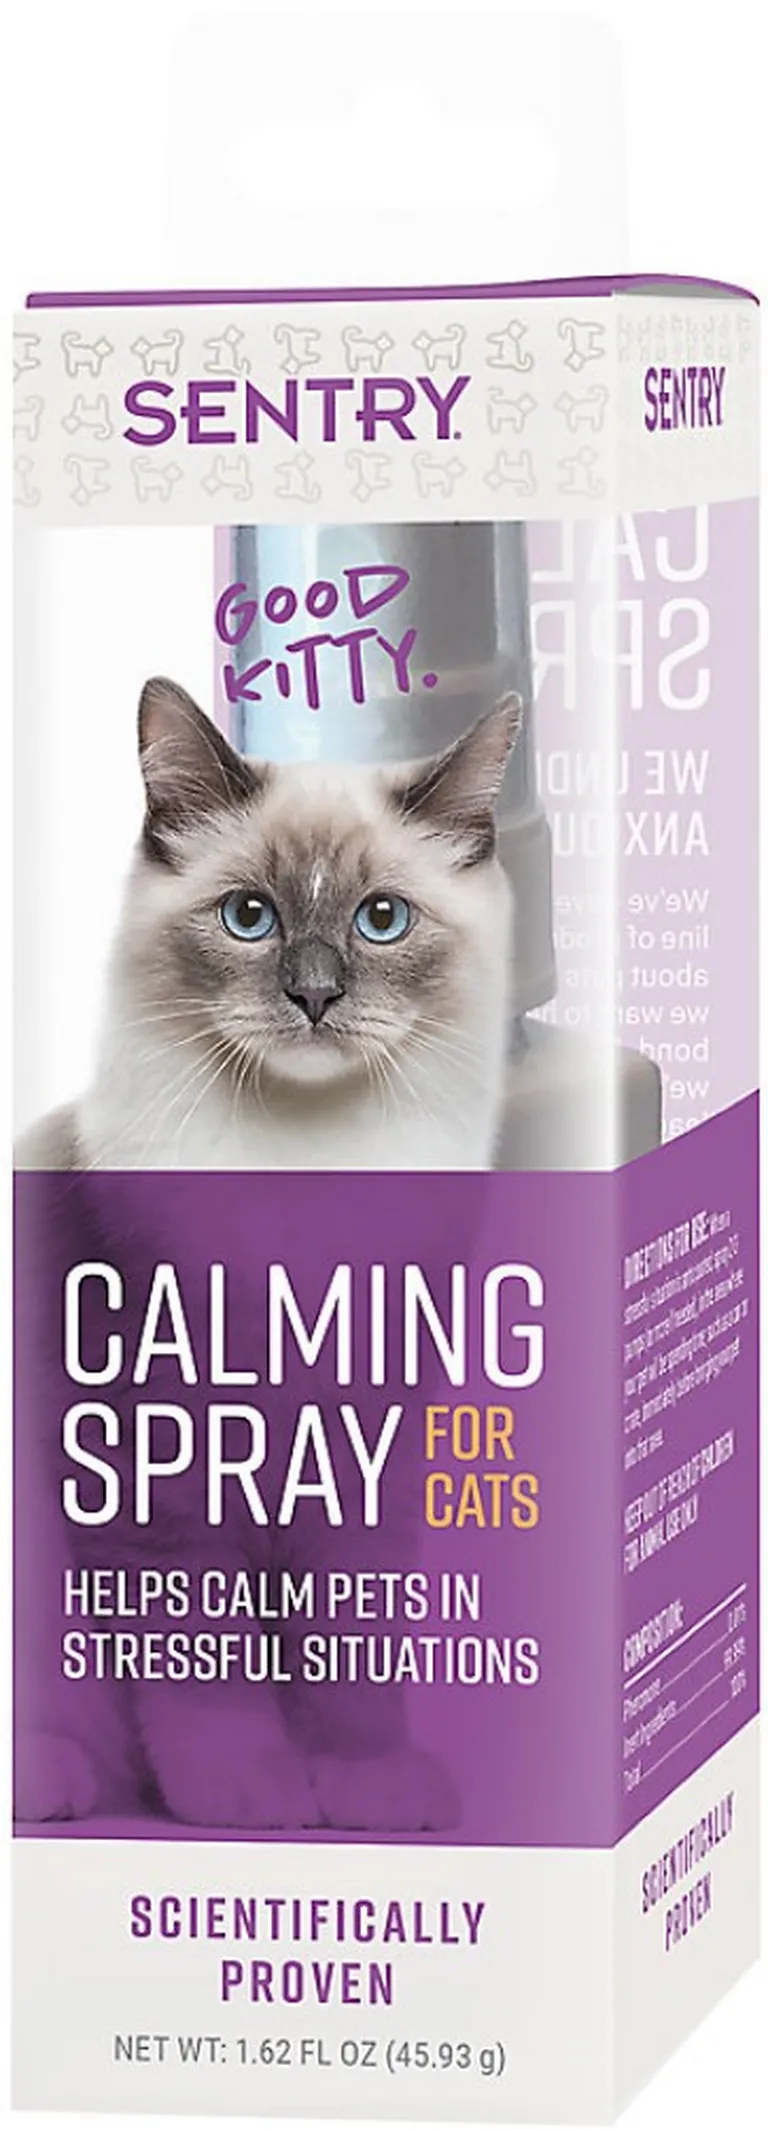 Sentry Calming Spray for Cats Helps Calm Pets in Stressful Situations Photo 1